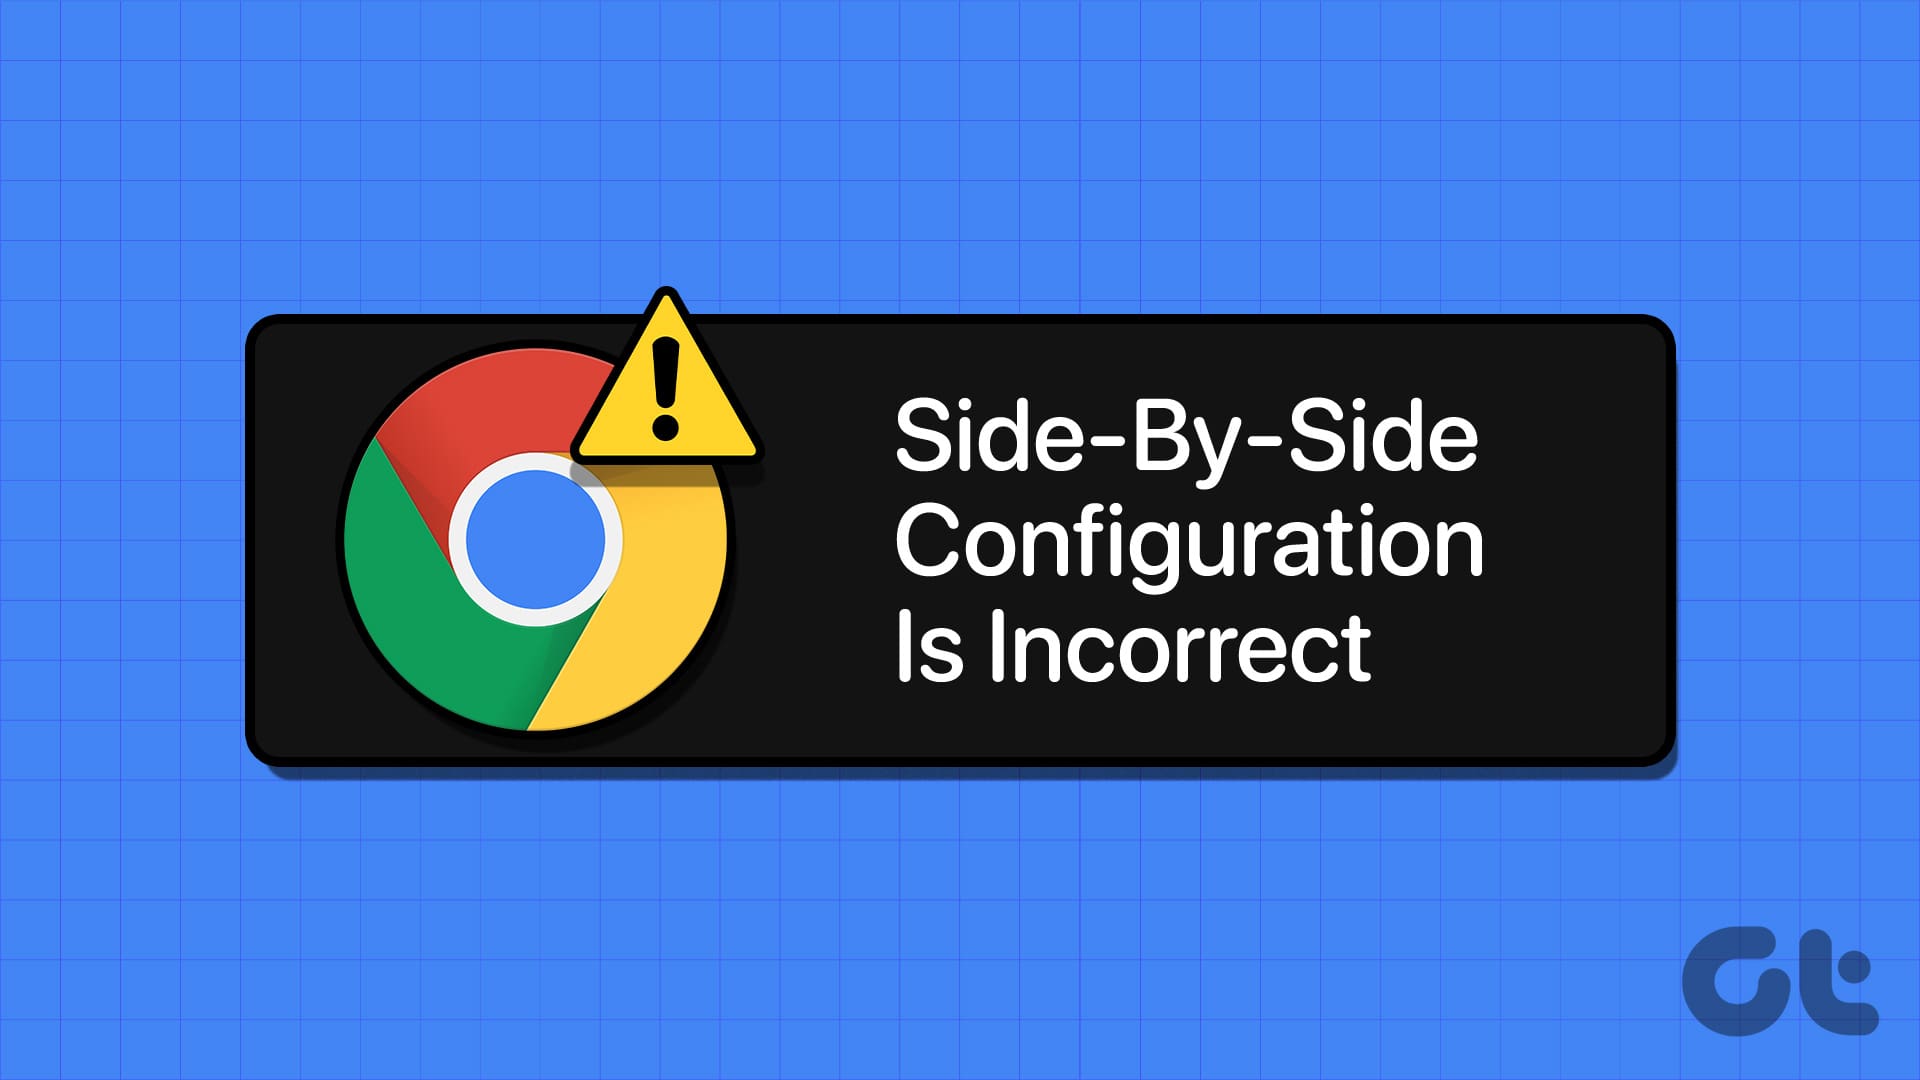 https://www.guidingtech.com/wp-content/uploads/Top-N-Ways-to-Fix-Chrome-Side-By-Side-Configuration-Is-Incorrect.jpg